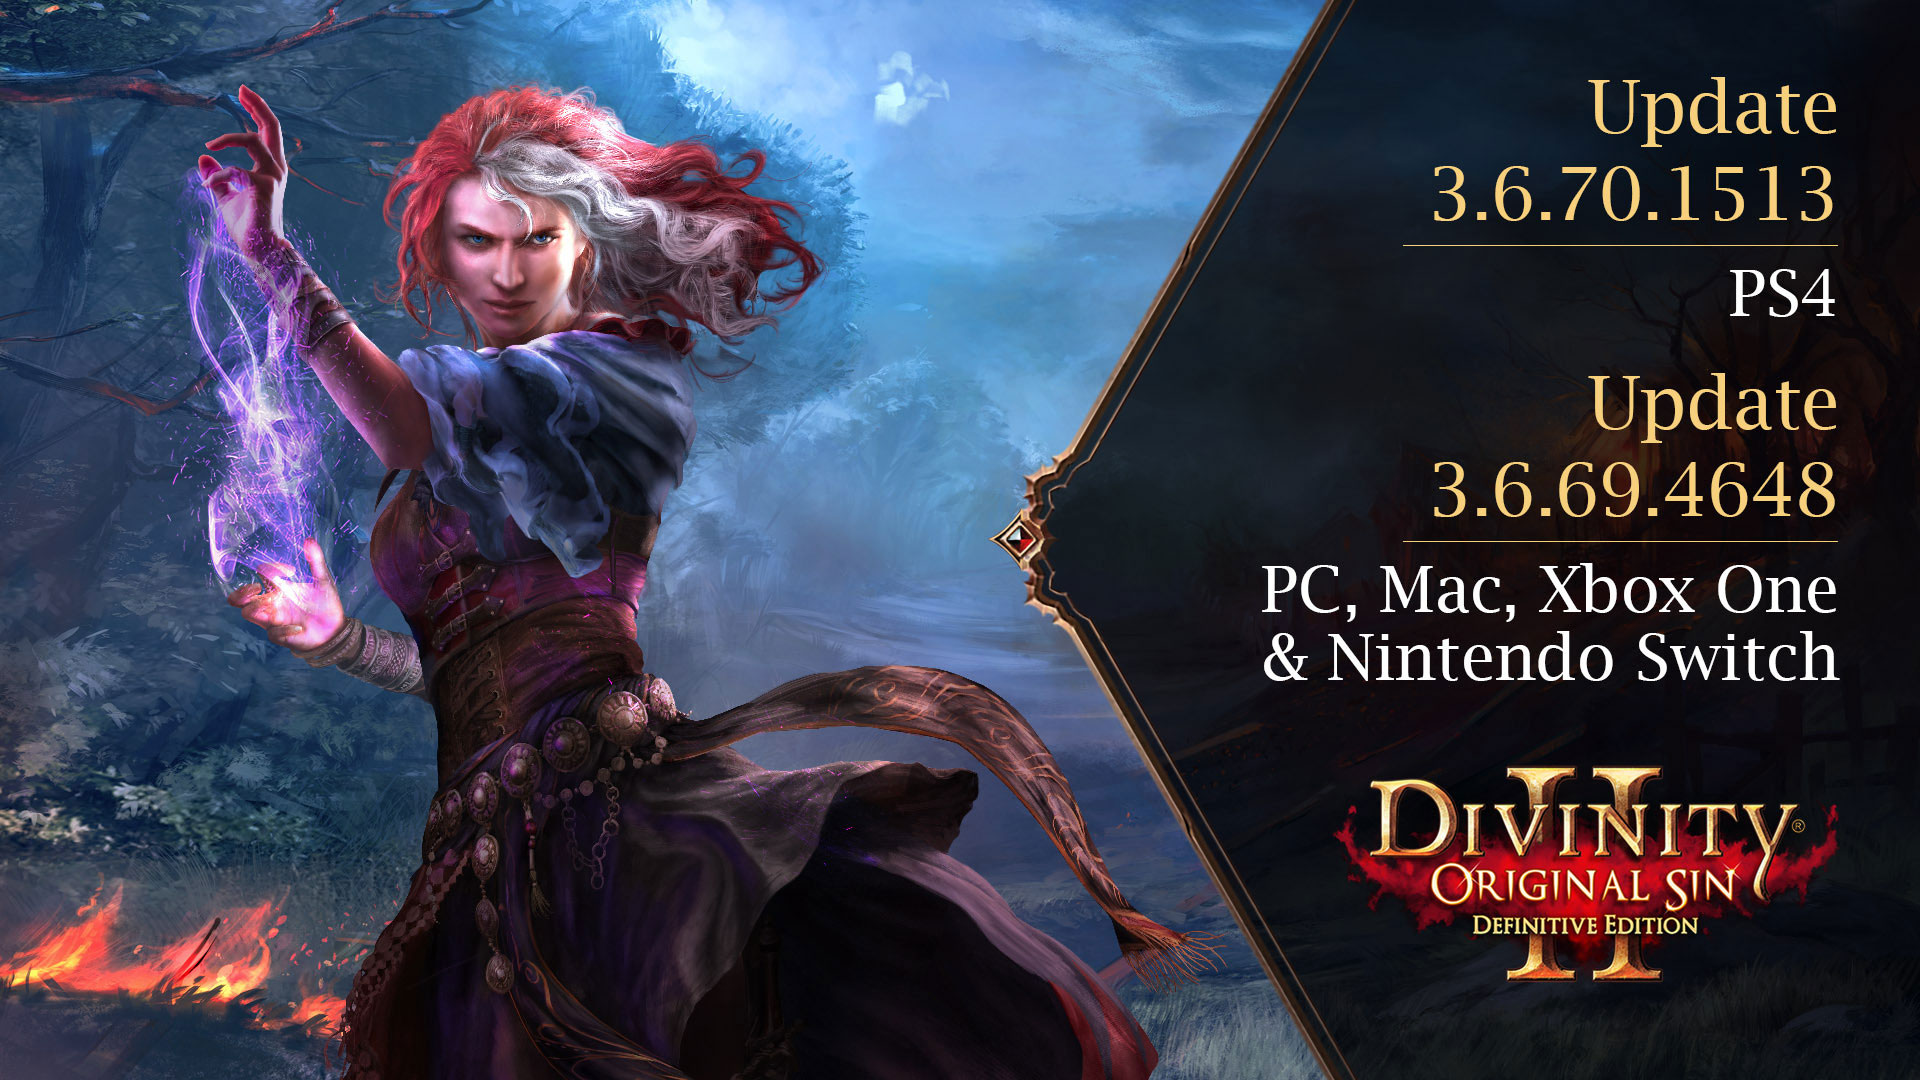 New Update for Divinity: Original Sin 2 - Definitive Edition Fixes an Assortment of Issues